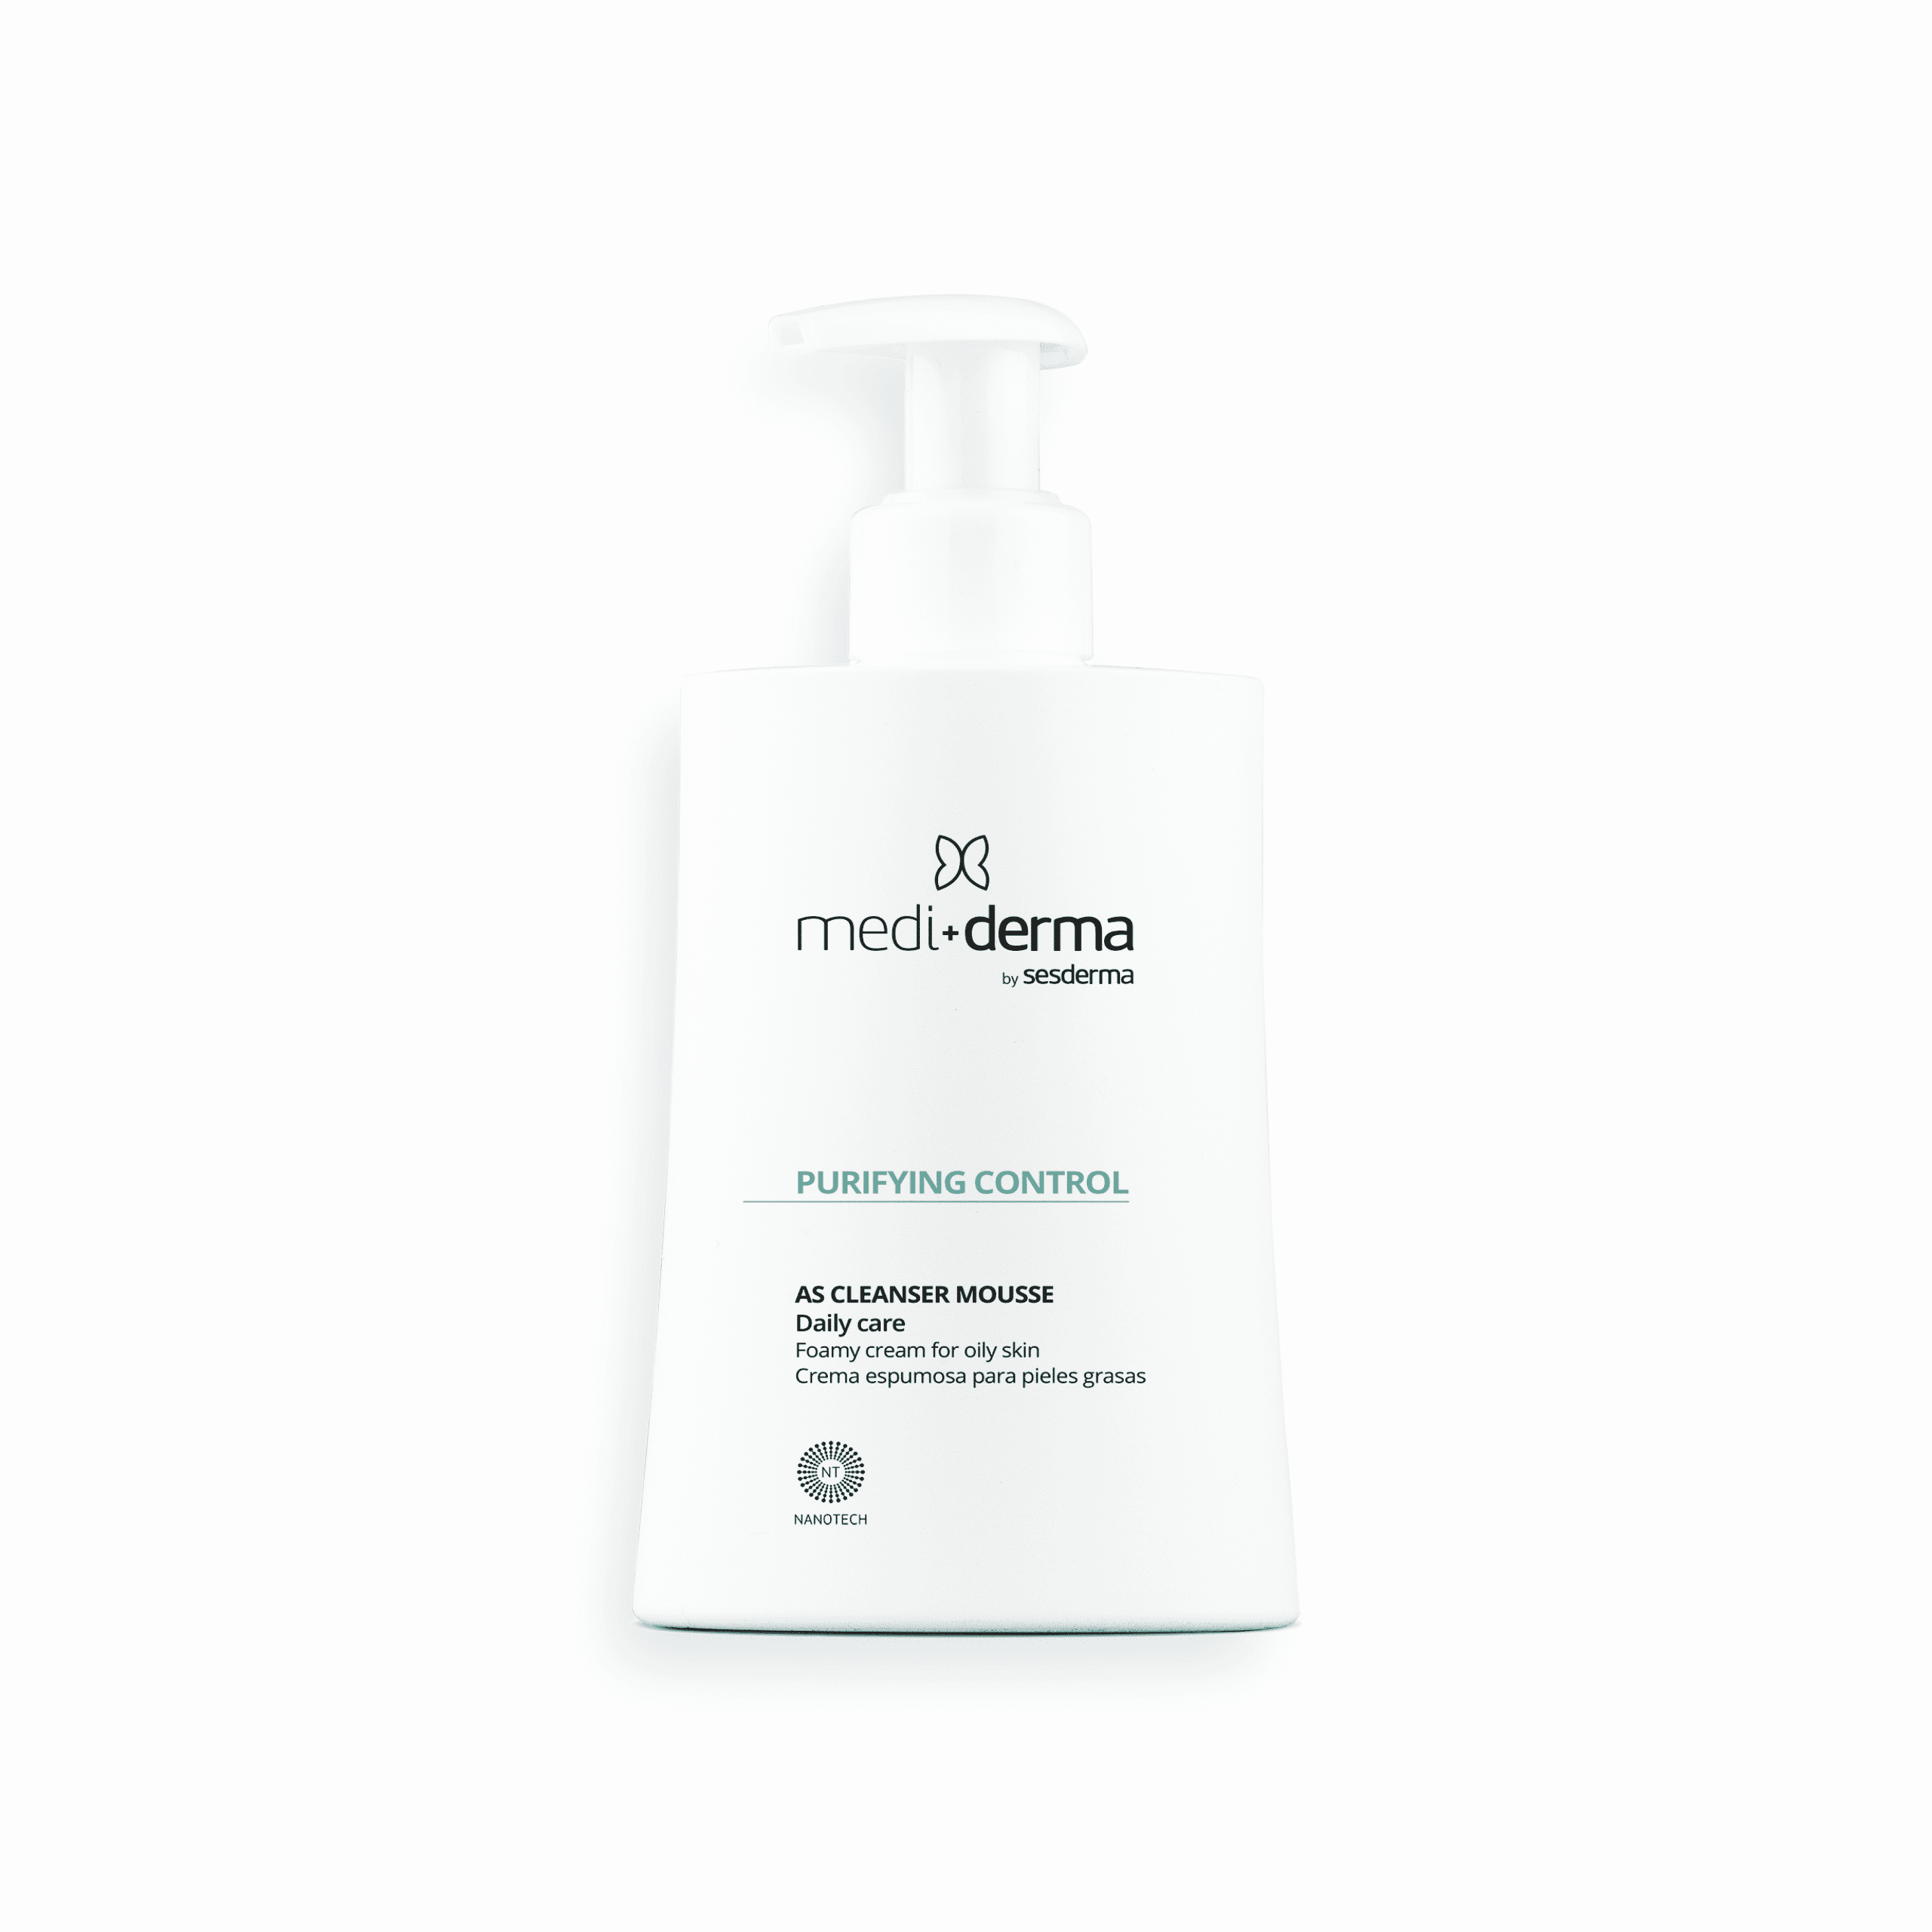 PURIFYING CONTROL AS CLEANSER MOUSE DAILY CARE 200ml